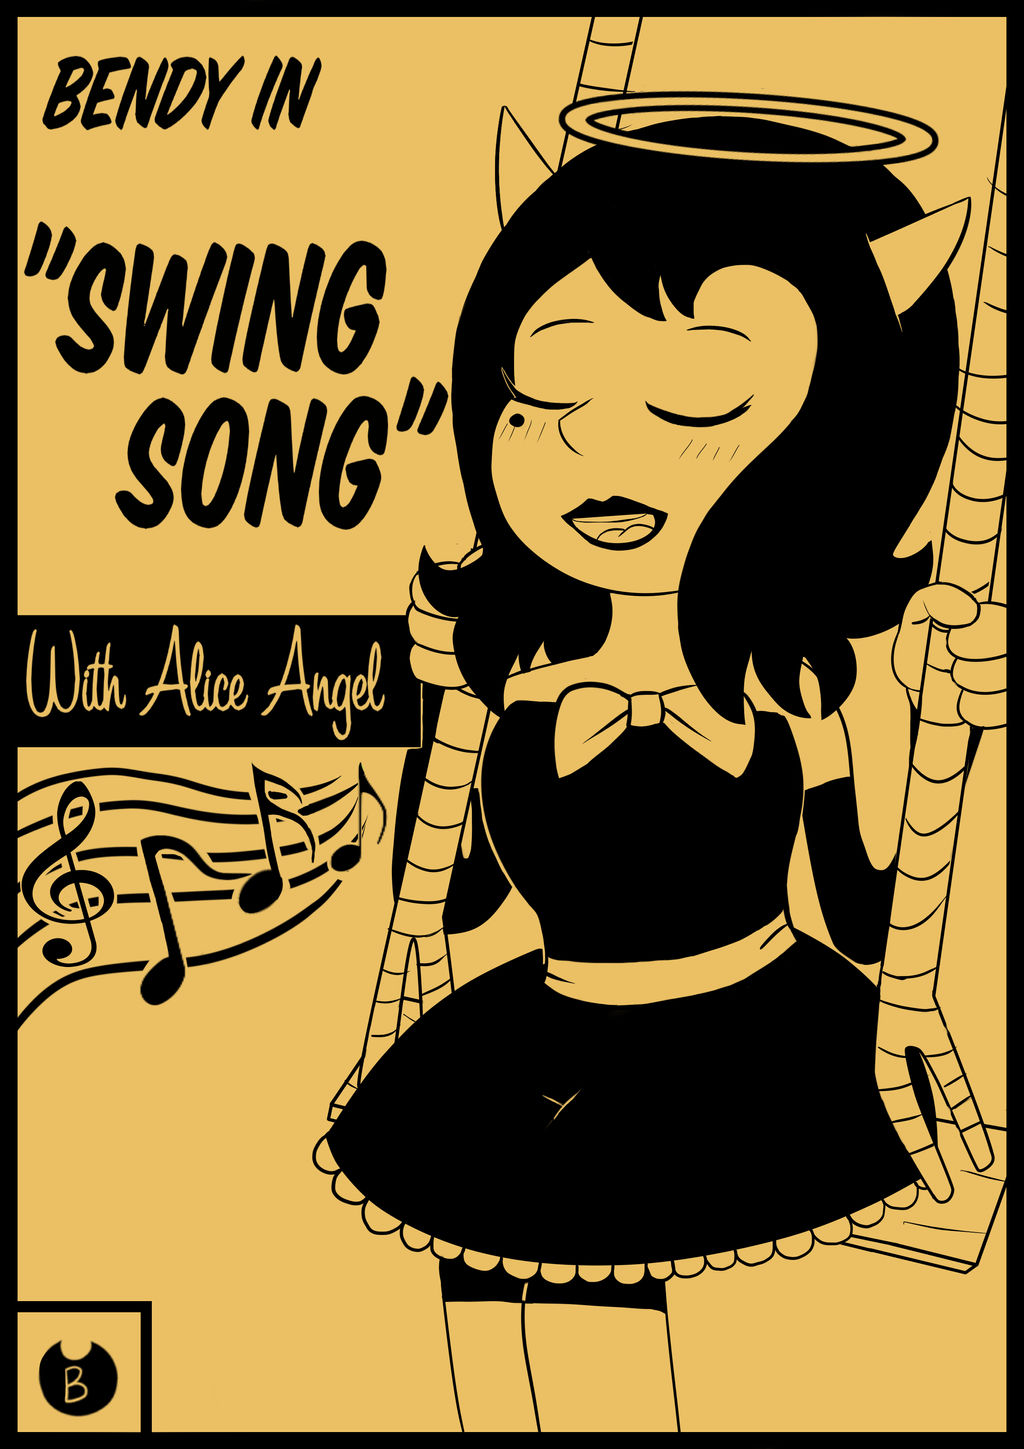 Bendy in -Swing Song with Alice Angel